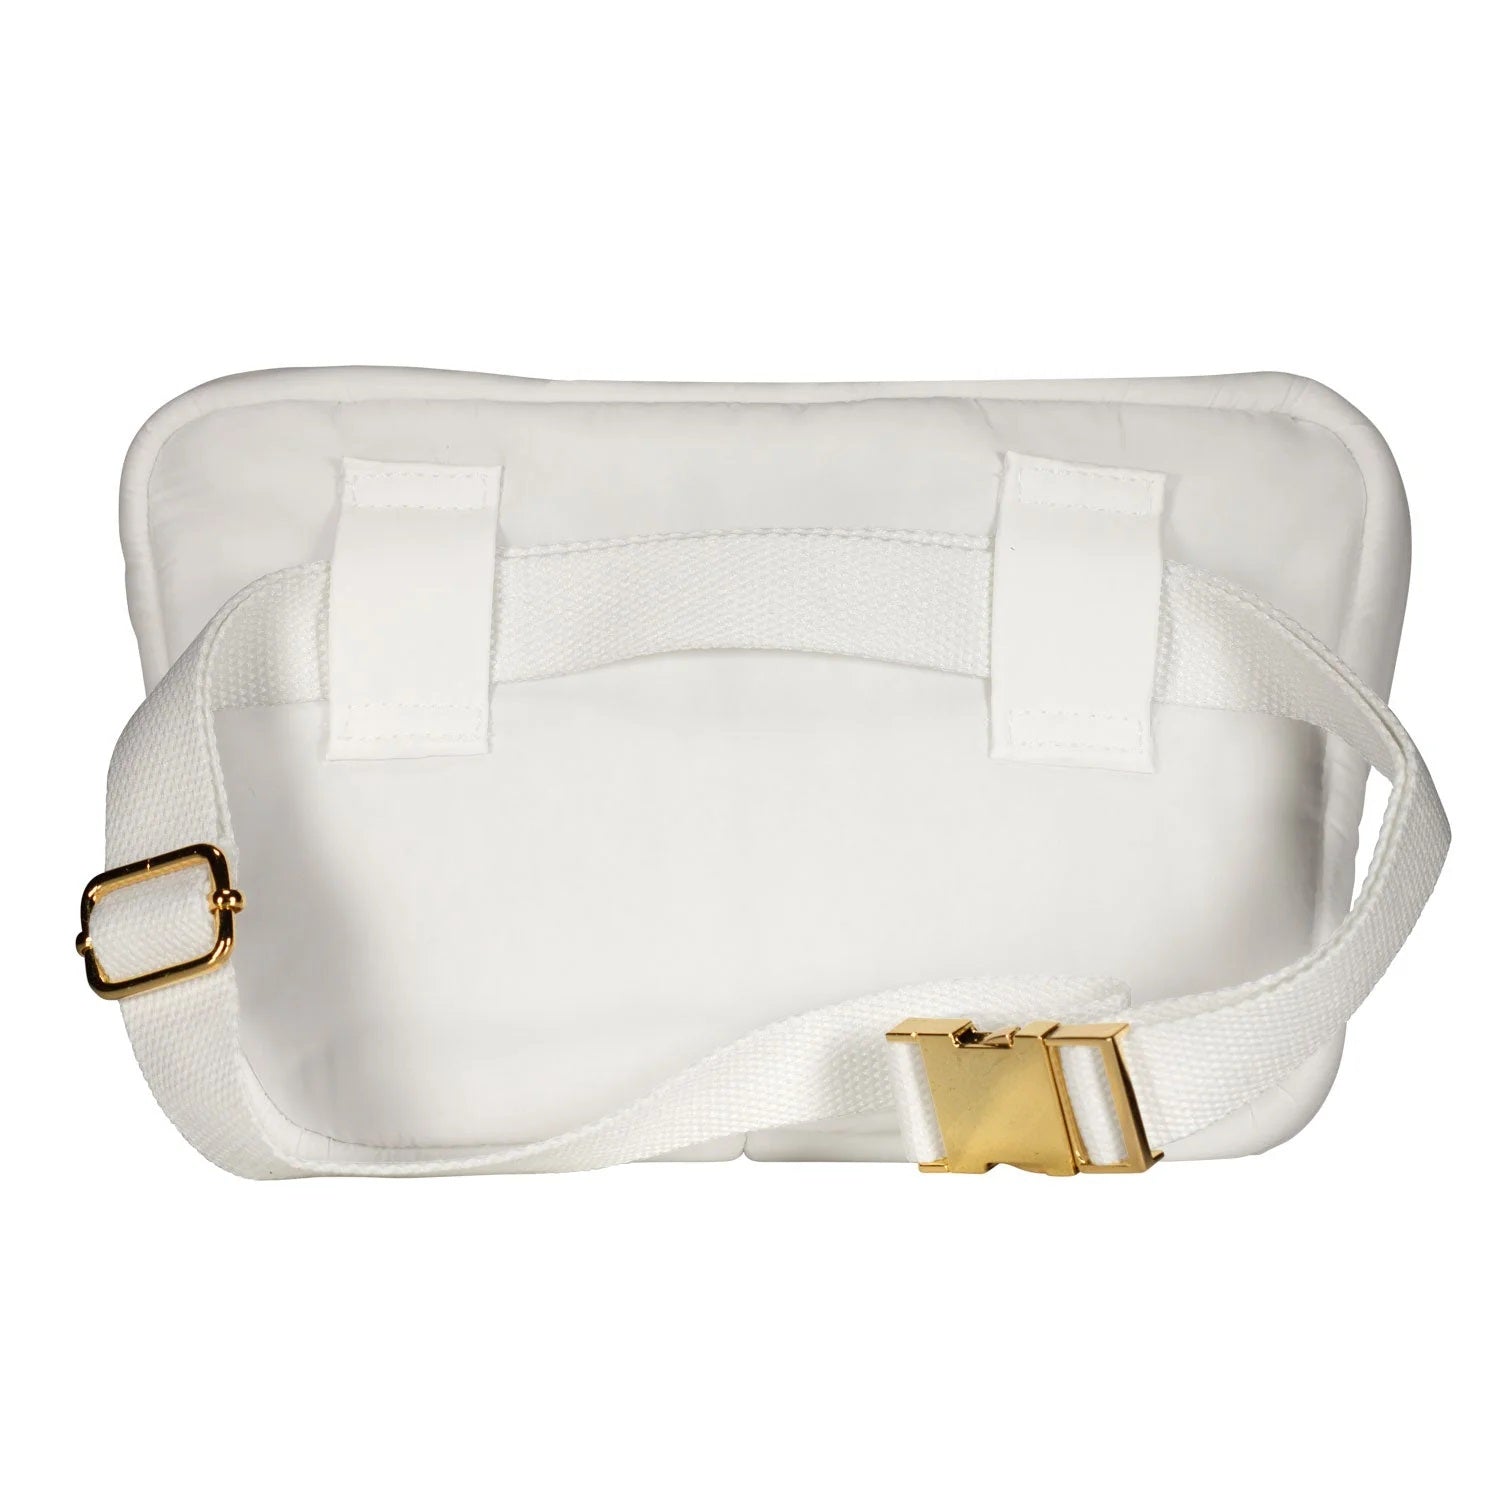 LIVING LIBATIONS Puffer Hip Bag with EMF Shield wisteria white